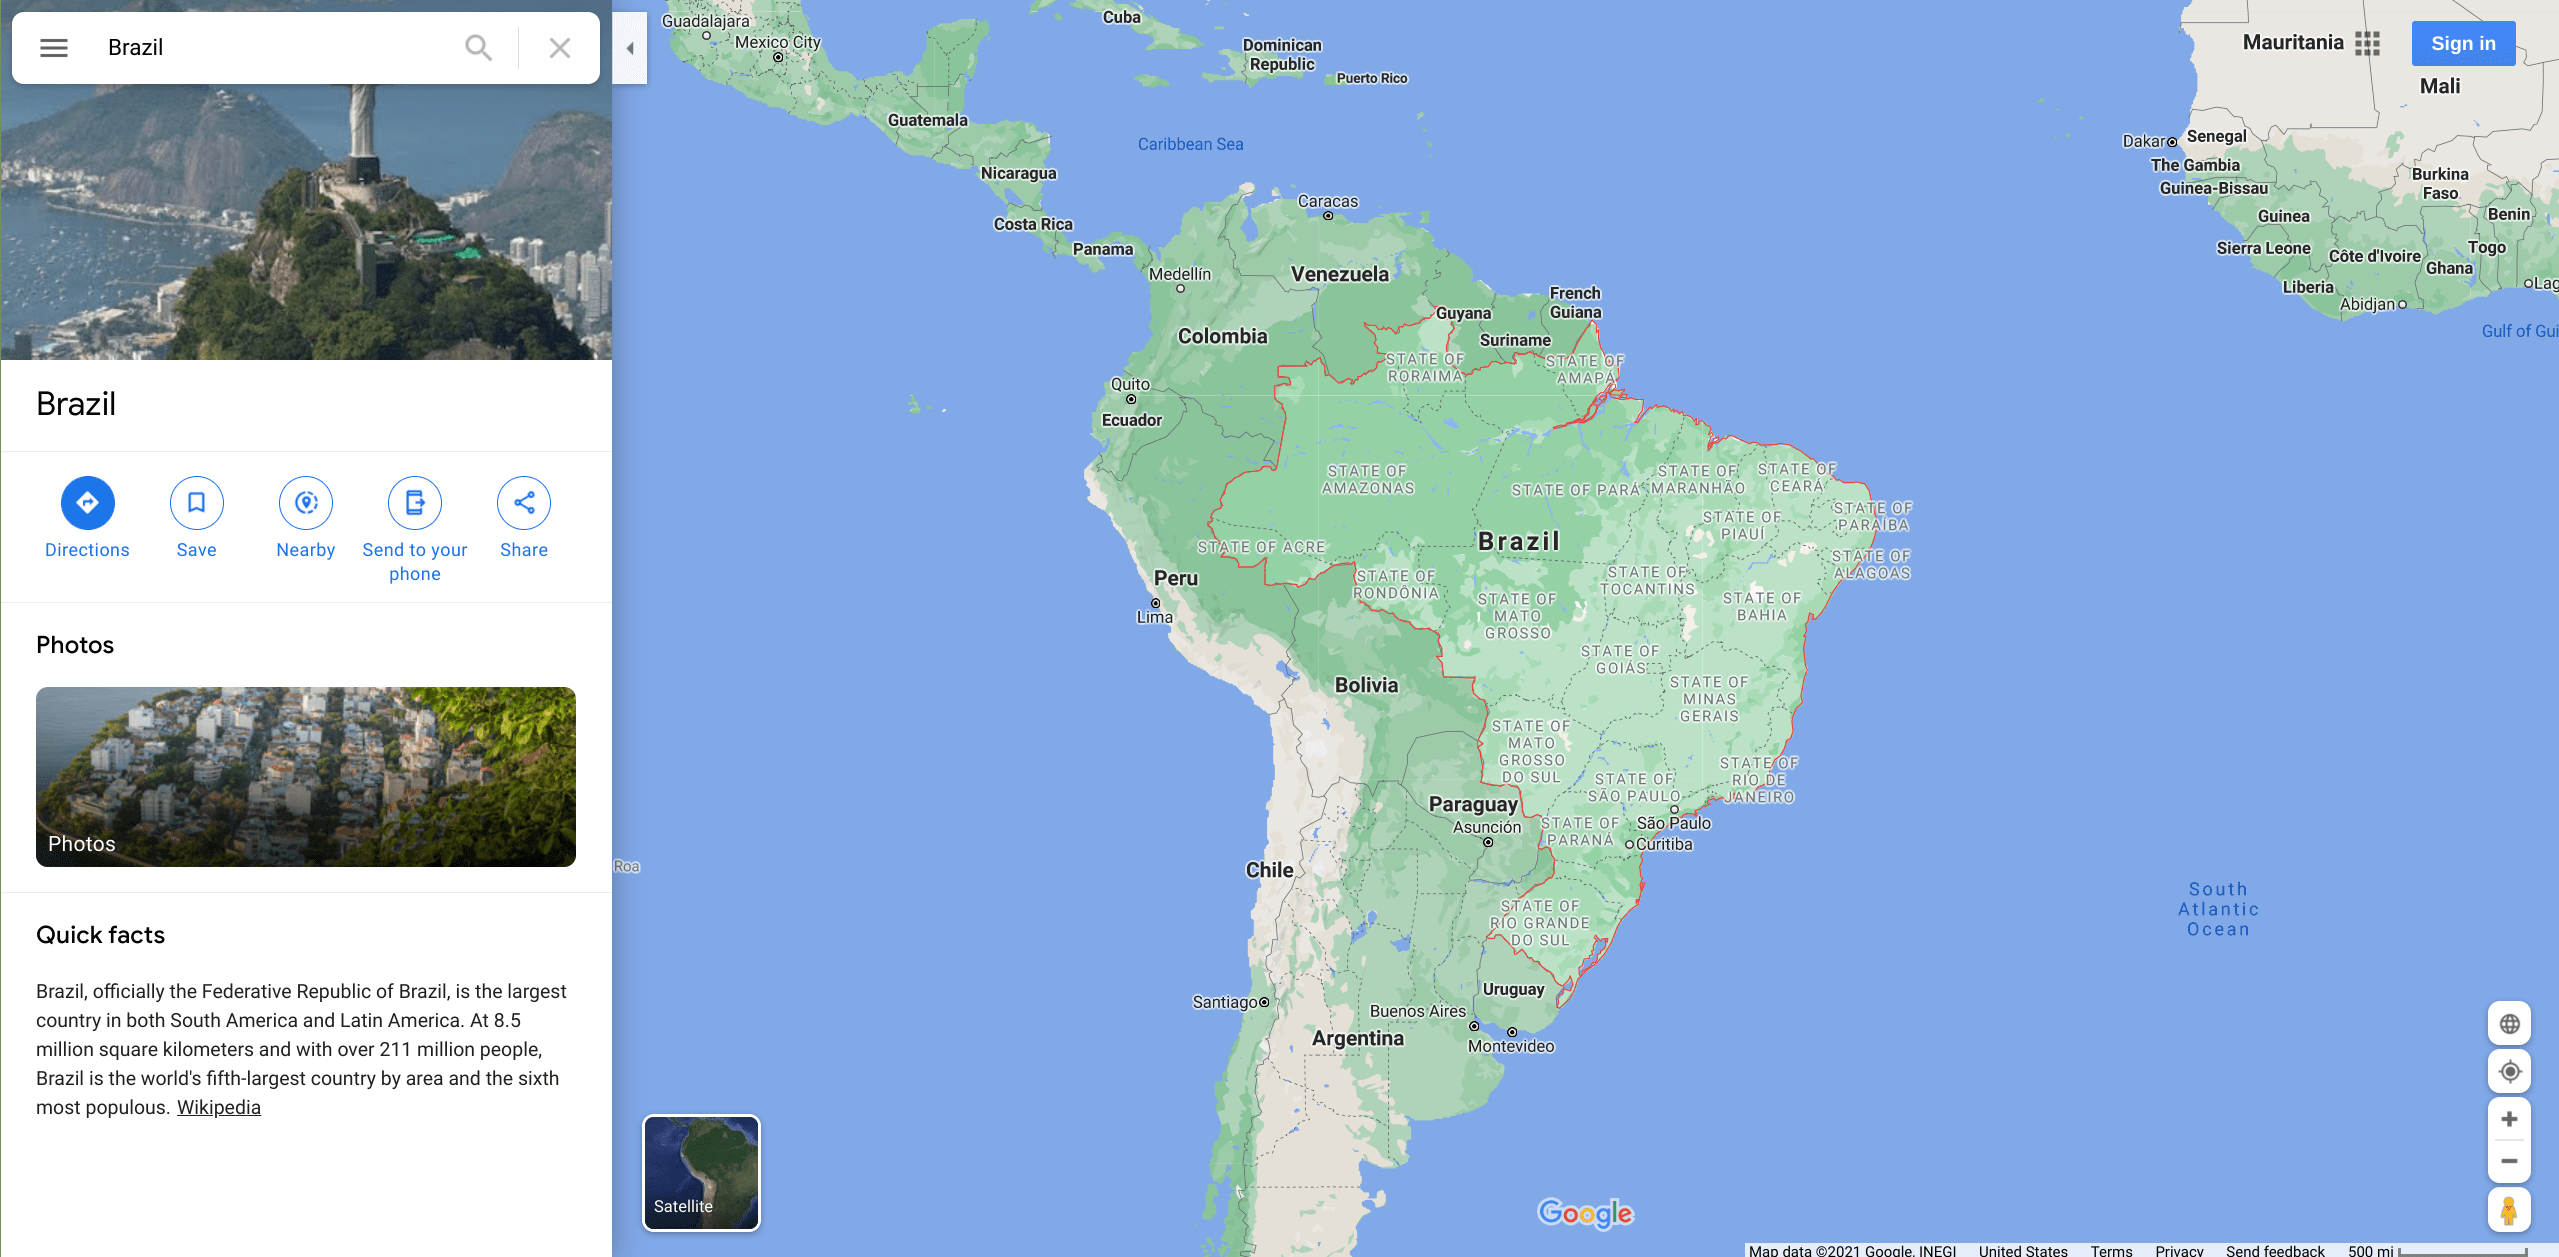 A Google Map showing the outline of Brazil